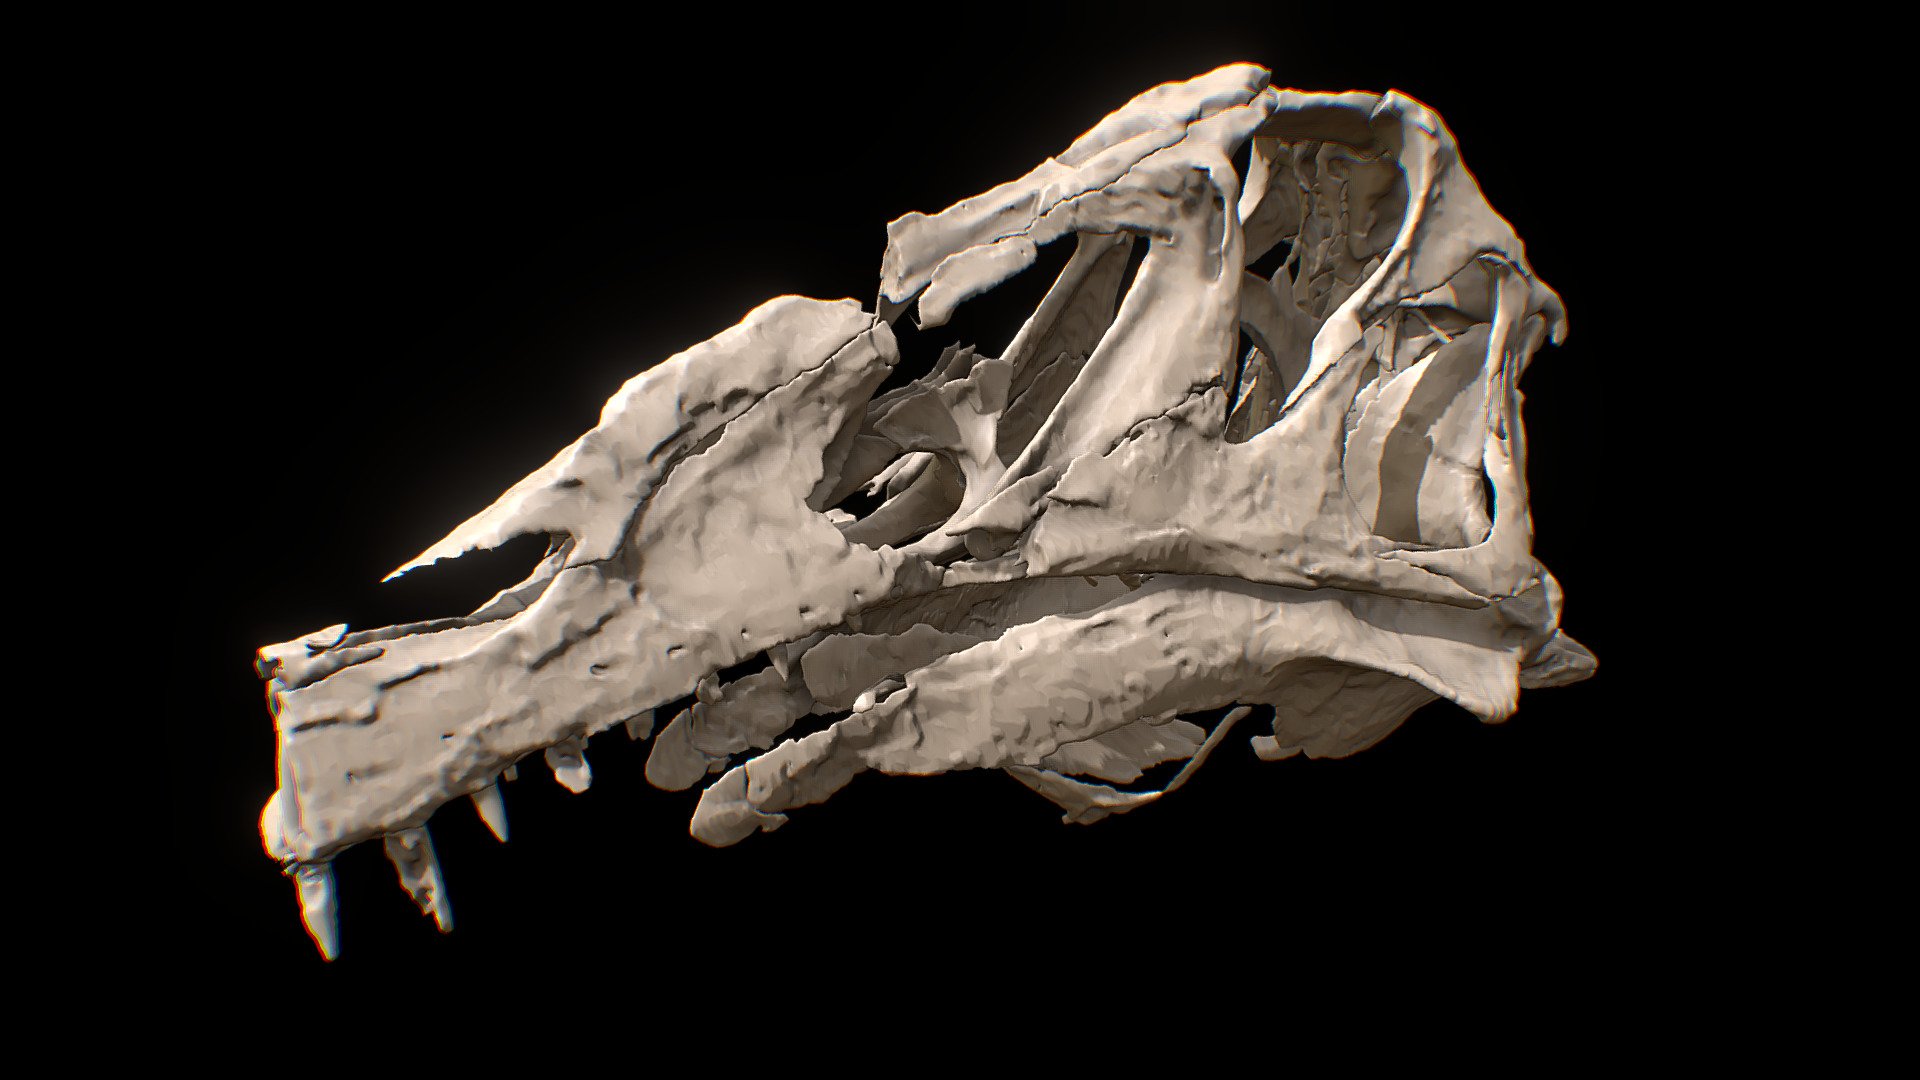 Retrodeformed skull of Irritator challengeri. Only preserved parts are shown.

I made this reconstruction for:
Schade, Marco, Rauhut, Oliver W. M., Foth, Christian, Moleman, Olof, and Evers, Serjoscha W. 2023. A reappraisal of the cranial and mandibular osteology of the spinosaurid Irritator challengeri (Dinosauria: Theropoda). 

Model can be downloaded at:
https://www.morphosource.org/projects/000372273 - Irritator skull - 3D model by Olof Moleman (@lordtrilobite) 3d model